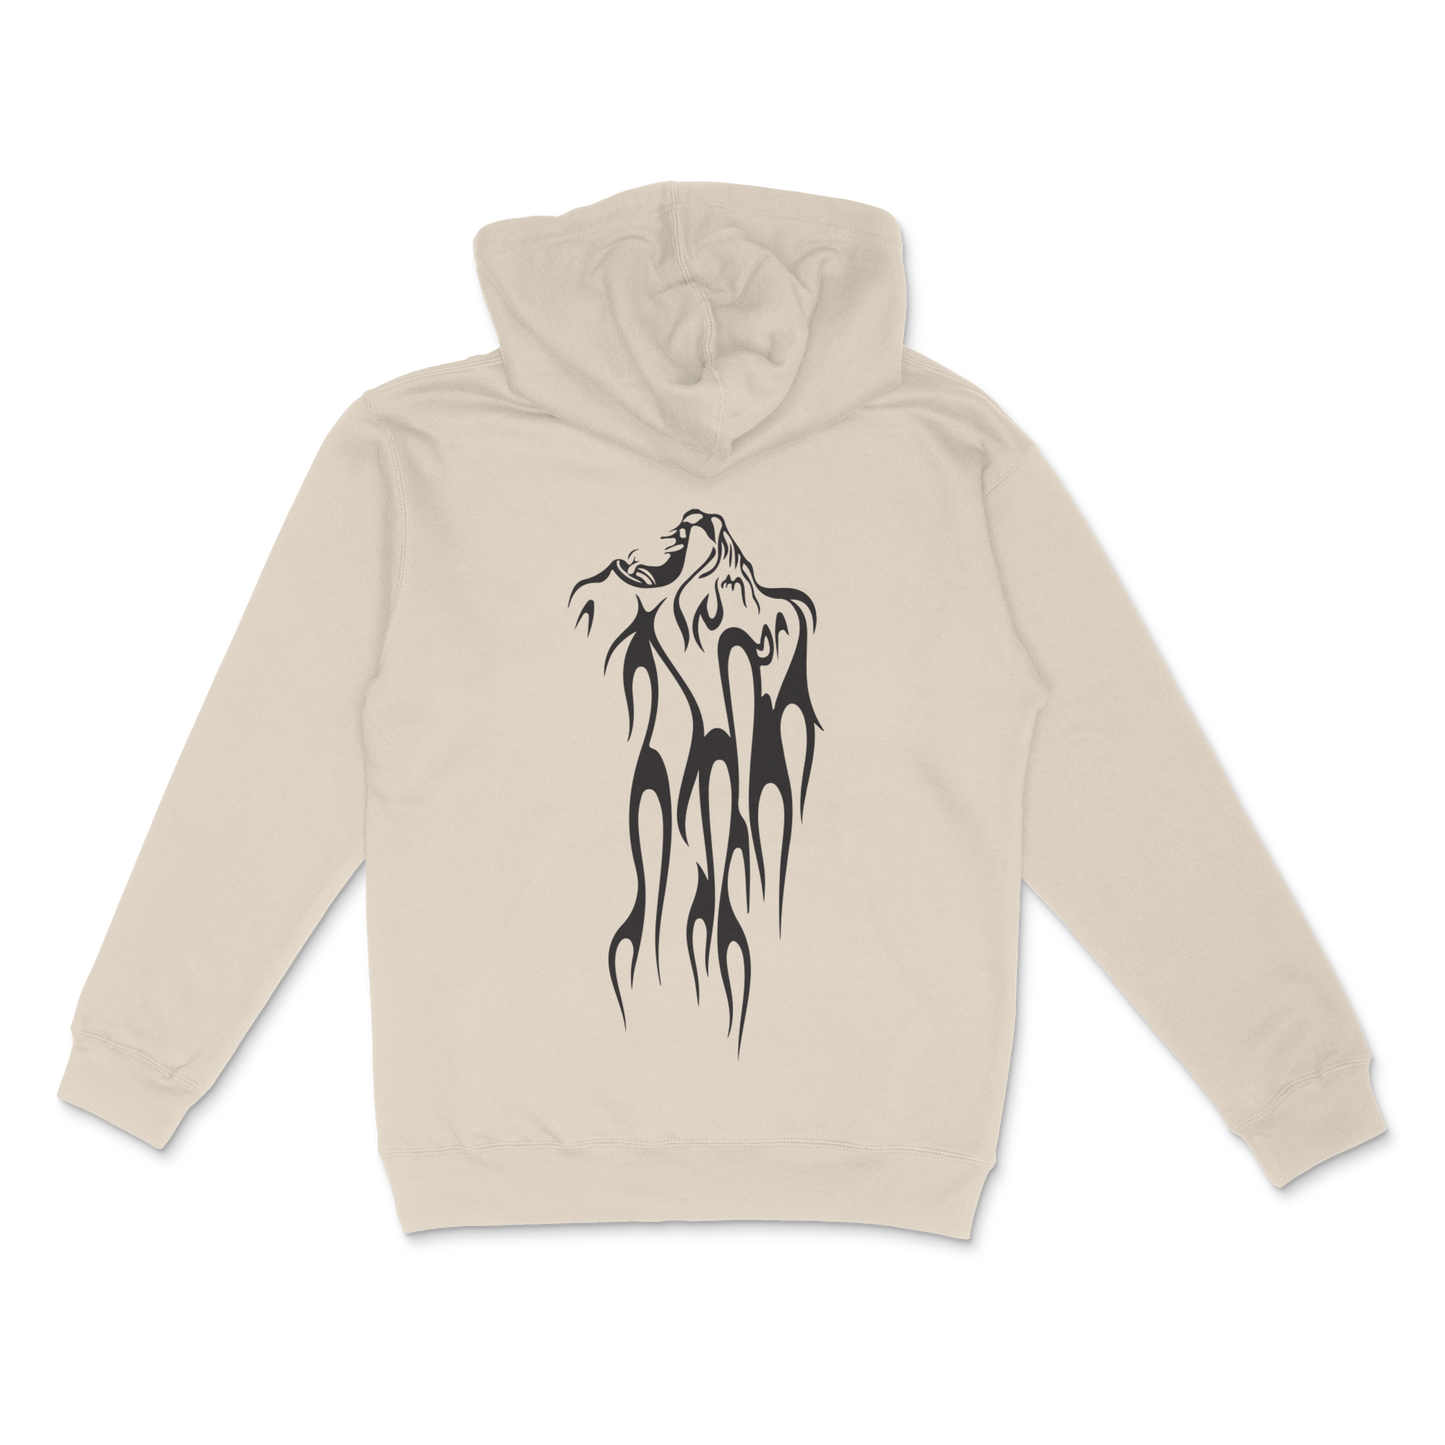 King of The Jungle Hoodie - Invincible - Flaming Lion - Cream